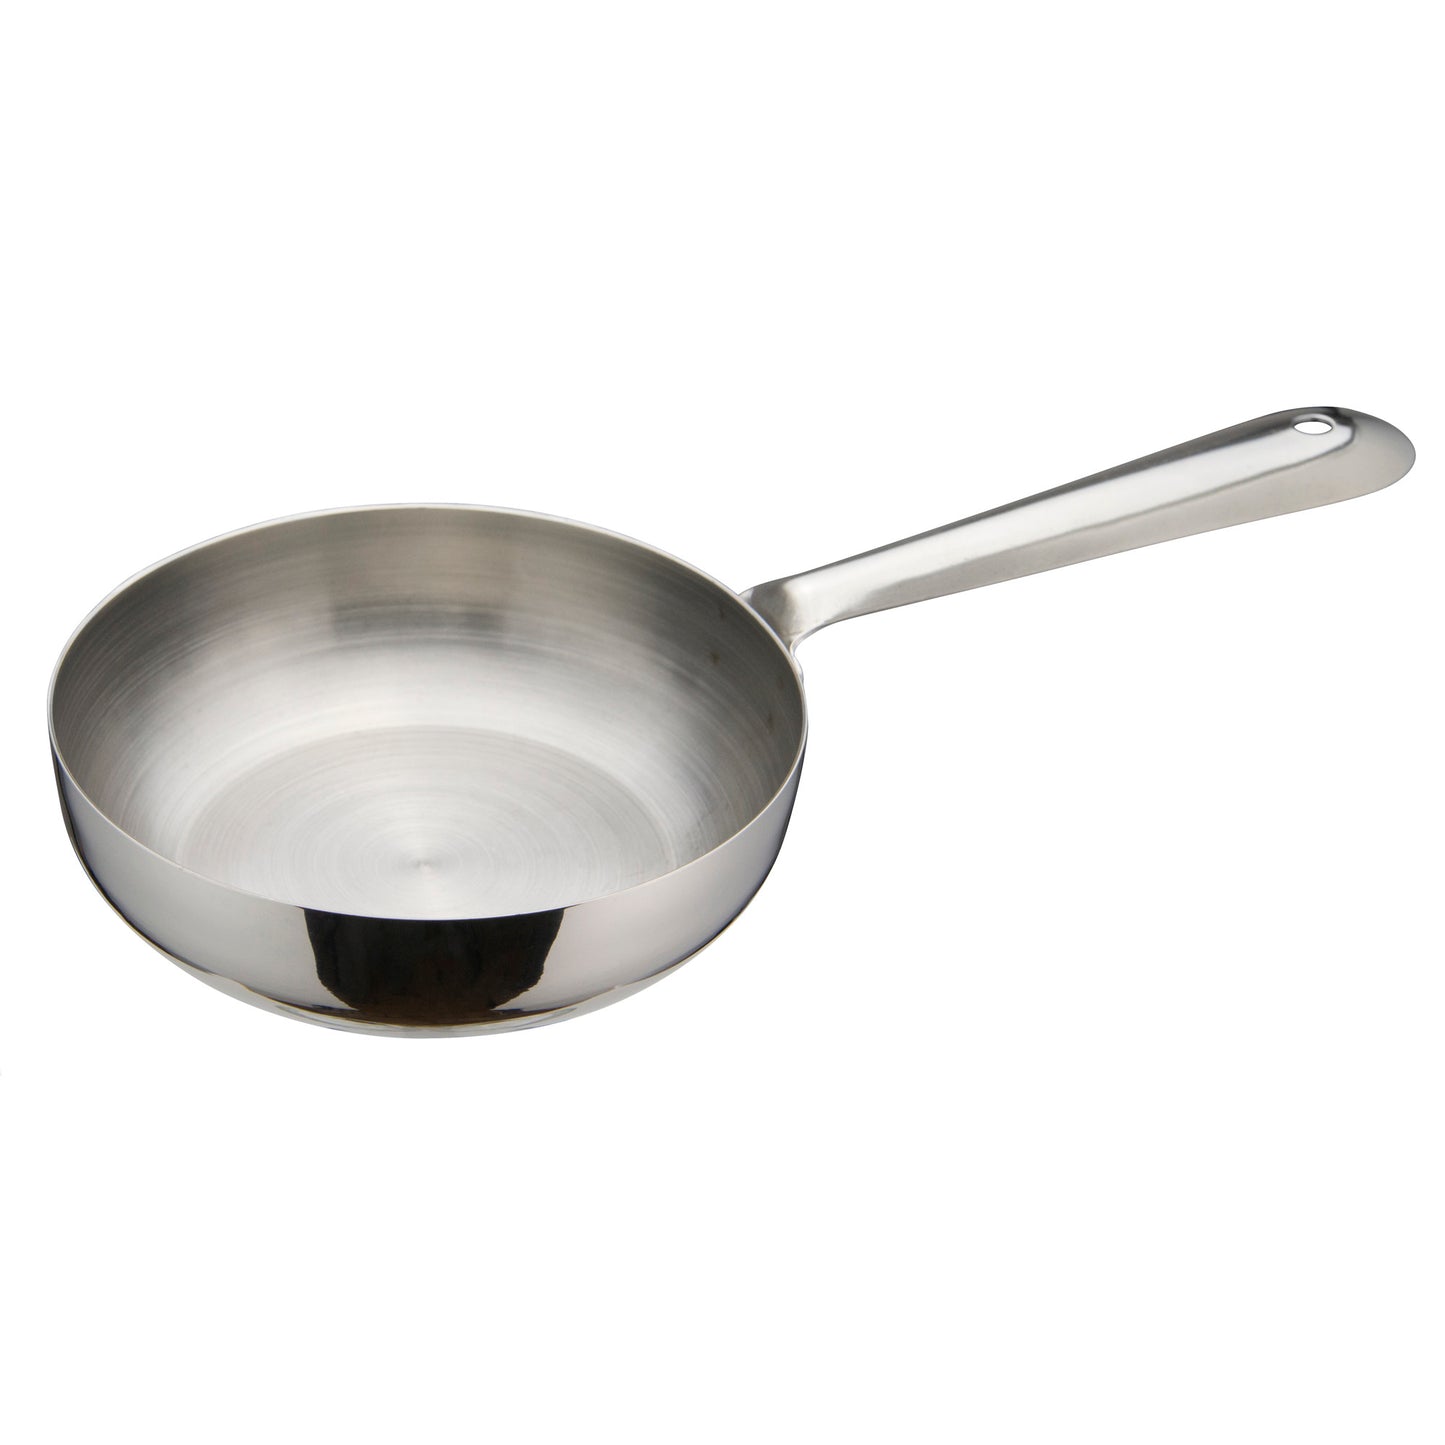 DCWC-102S - Mini Fry Pan, Stainless Steel - 4-1/2"